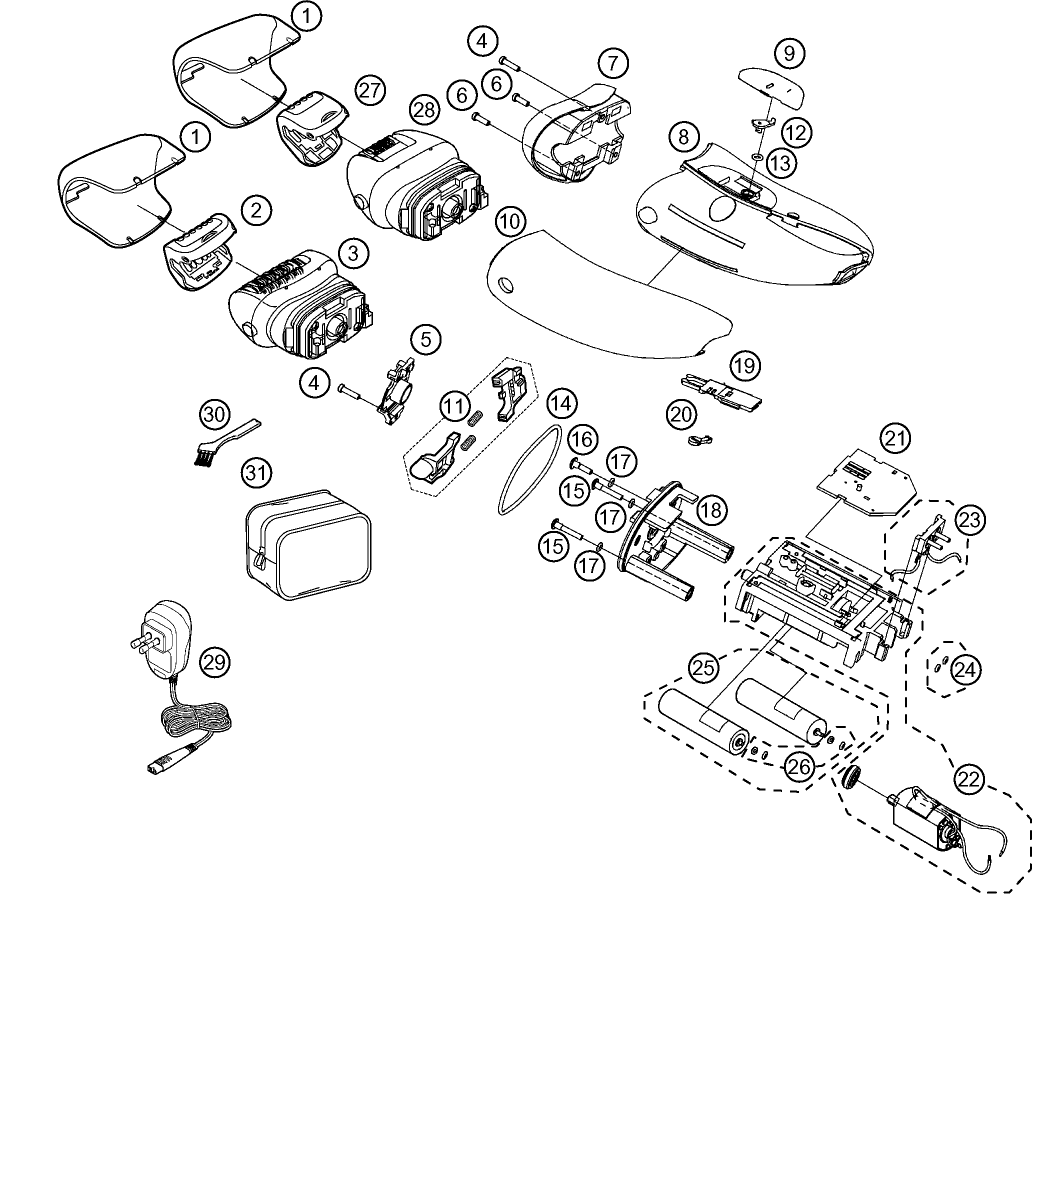 ES-2054: Exploded View